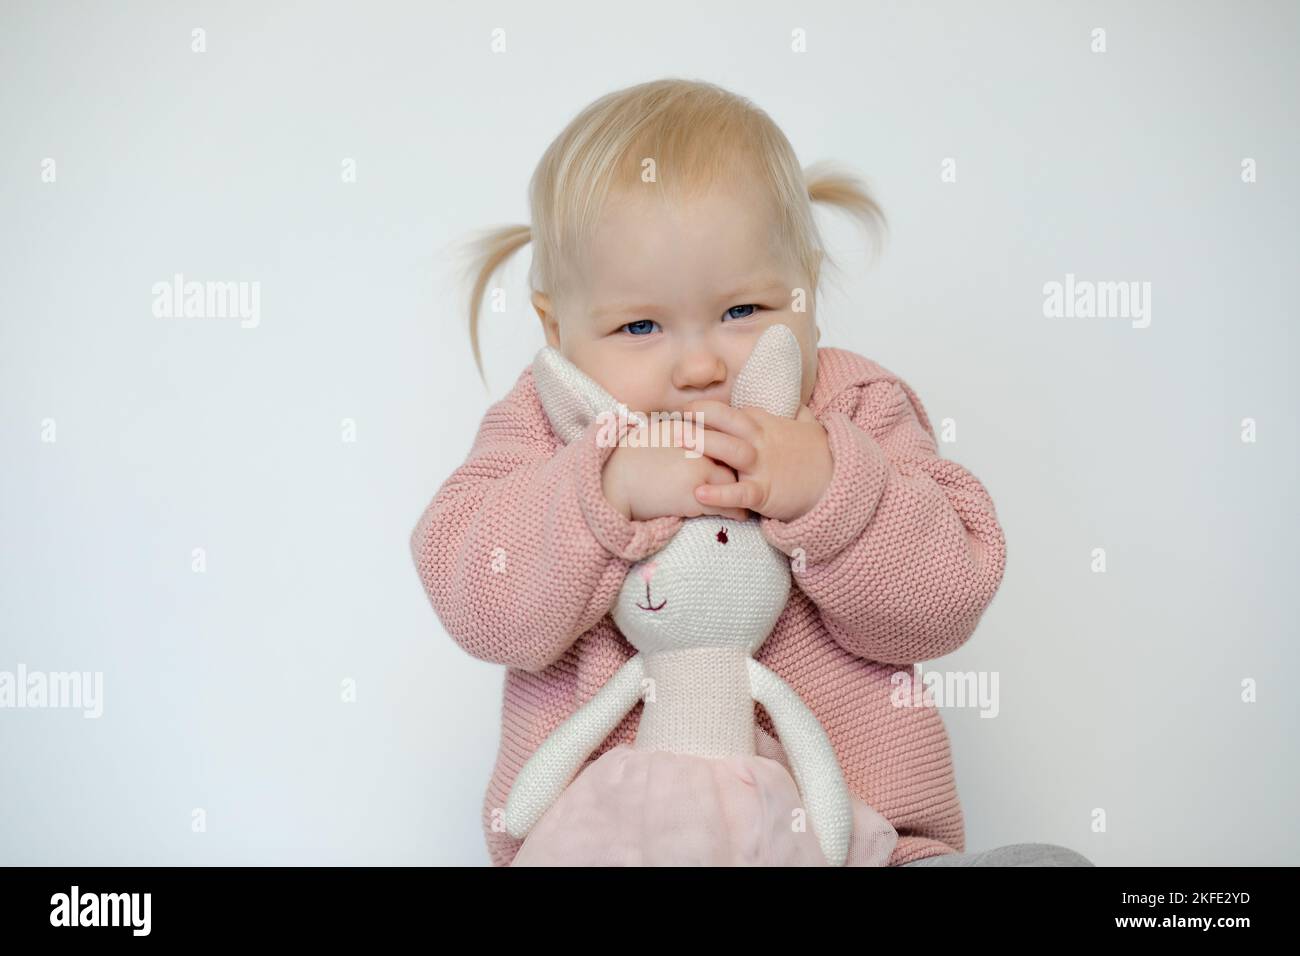 Pretty baby girl play with stuffed animal, isolated on white. Cheerful toddler tightly embracing teddy bunny. Blonde haired little child in pink Stock Photo